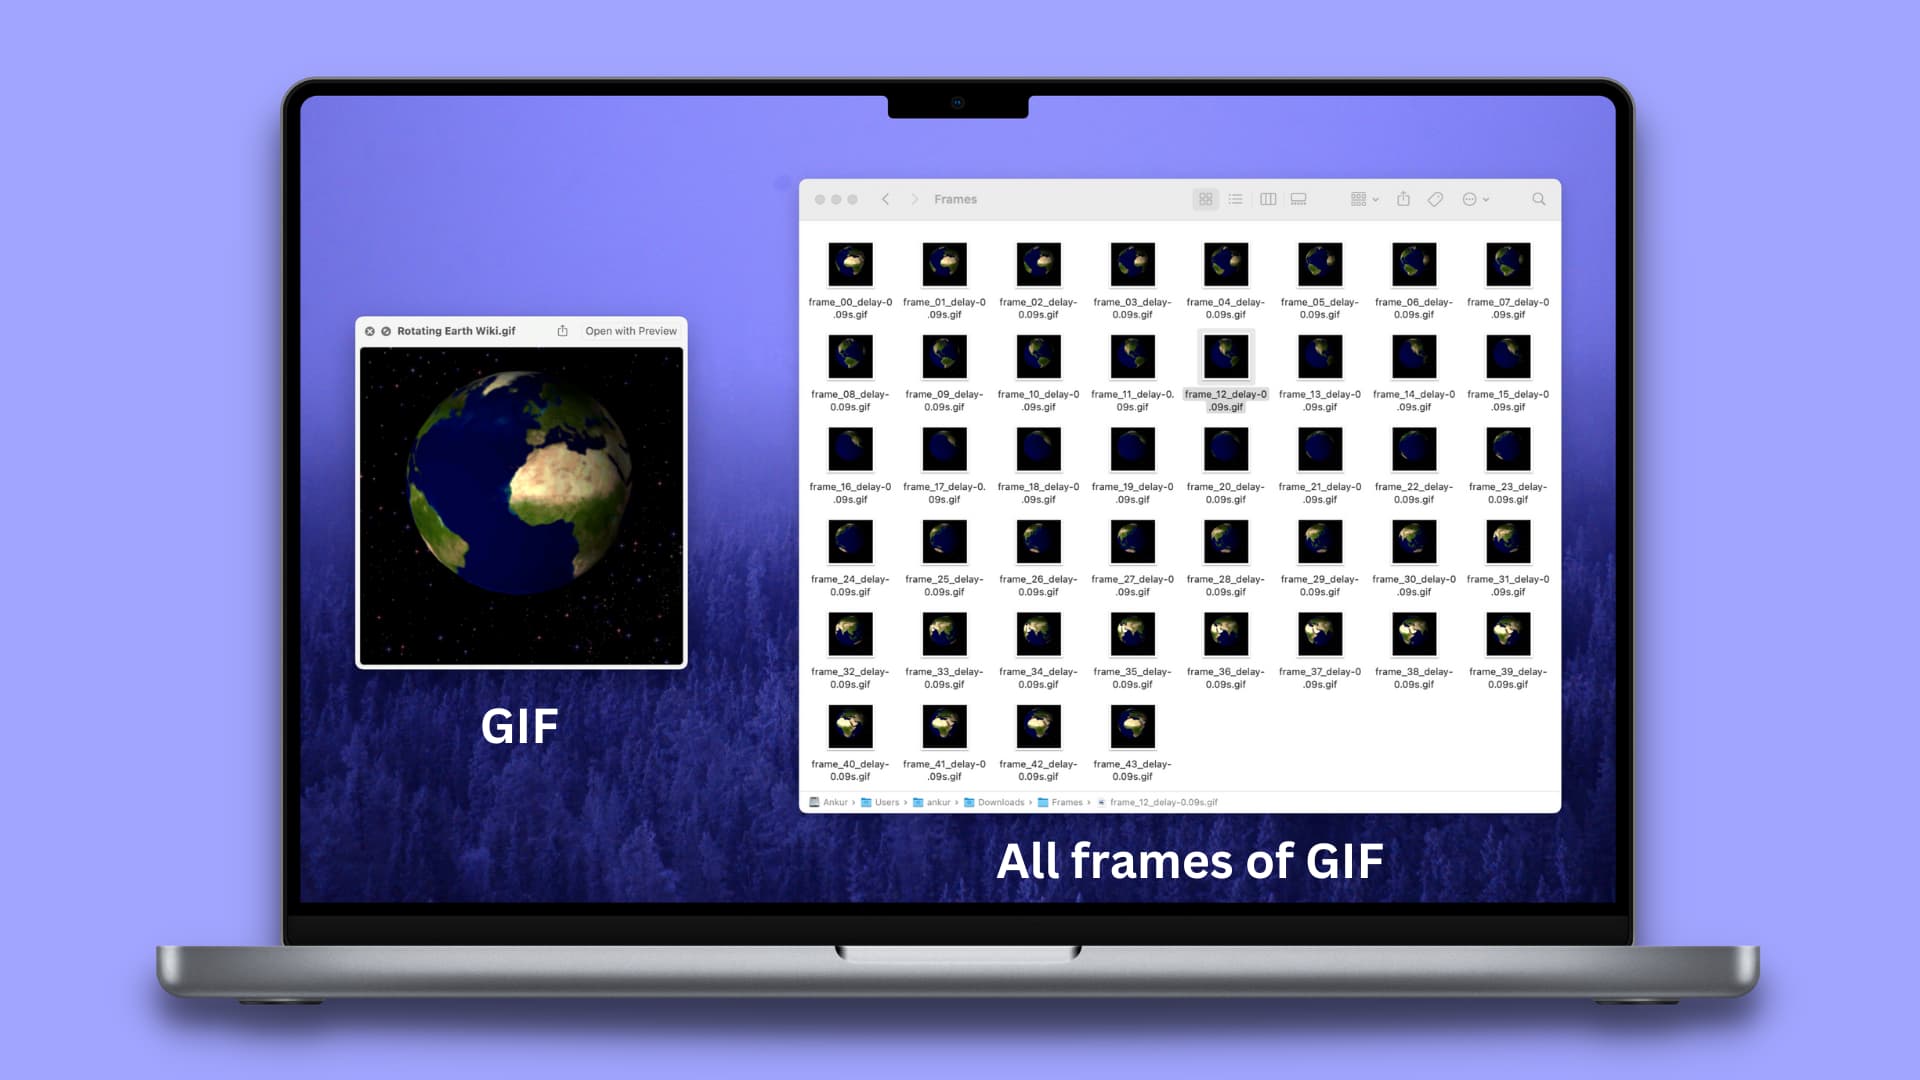 Saving individual frames of a GIF as separate images on Mac